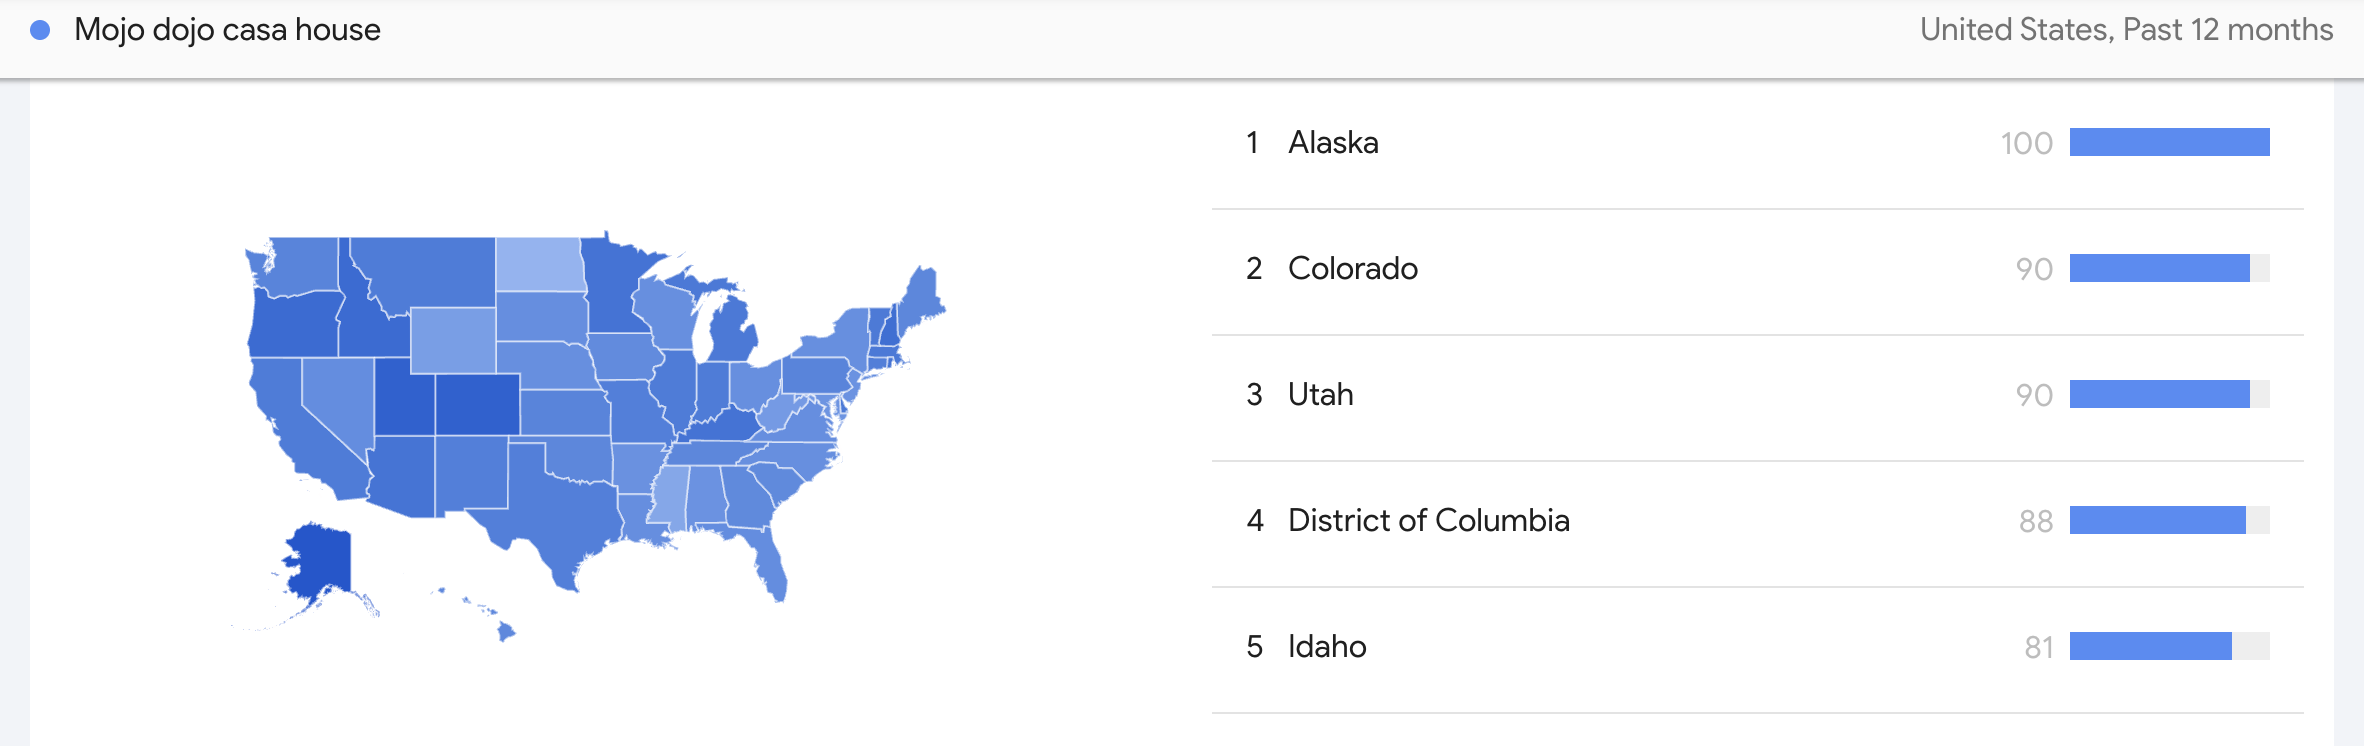 a Google Trends heatmap showing search volume of the keyword mojo dojo casa house by state